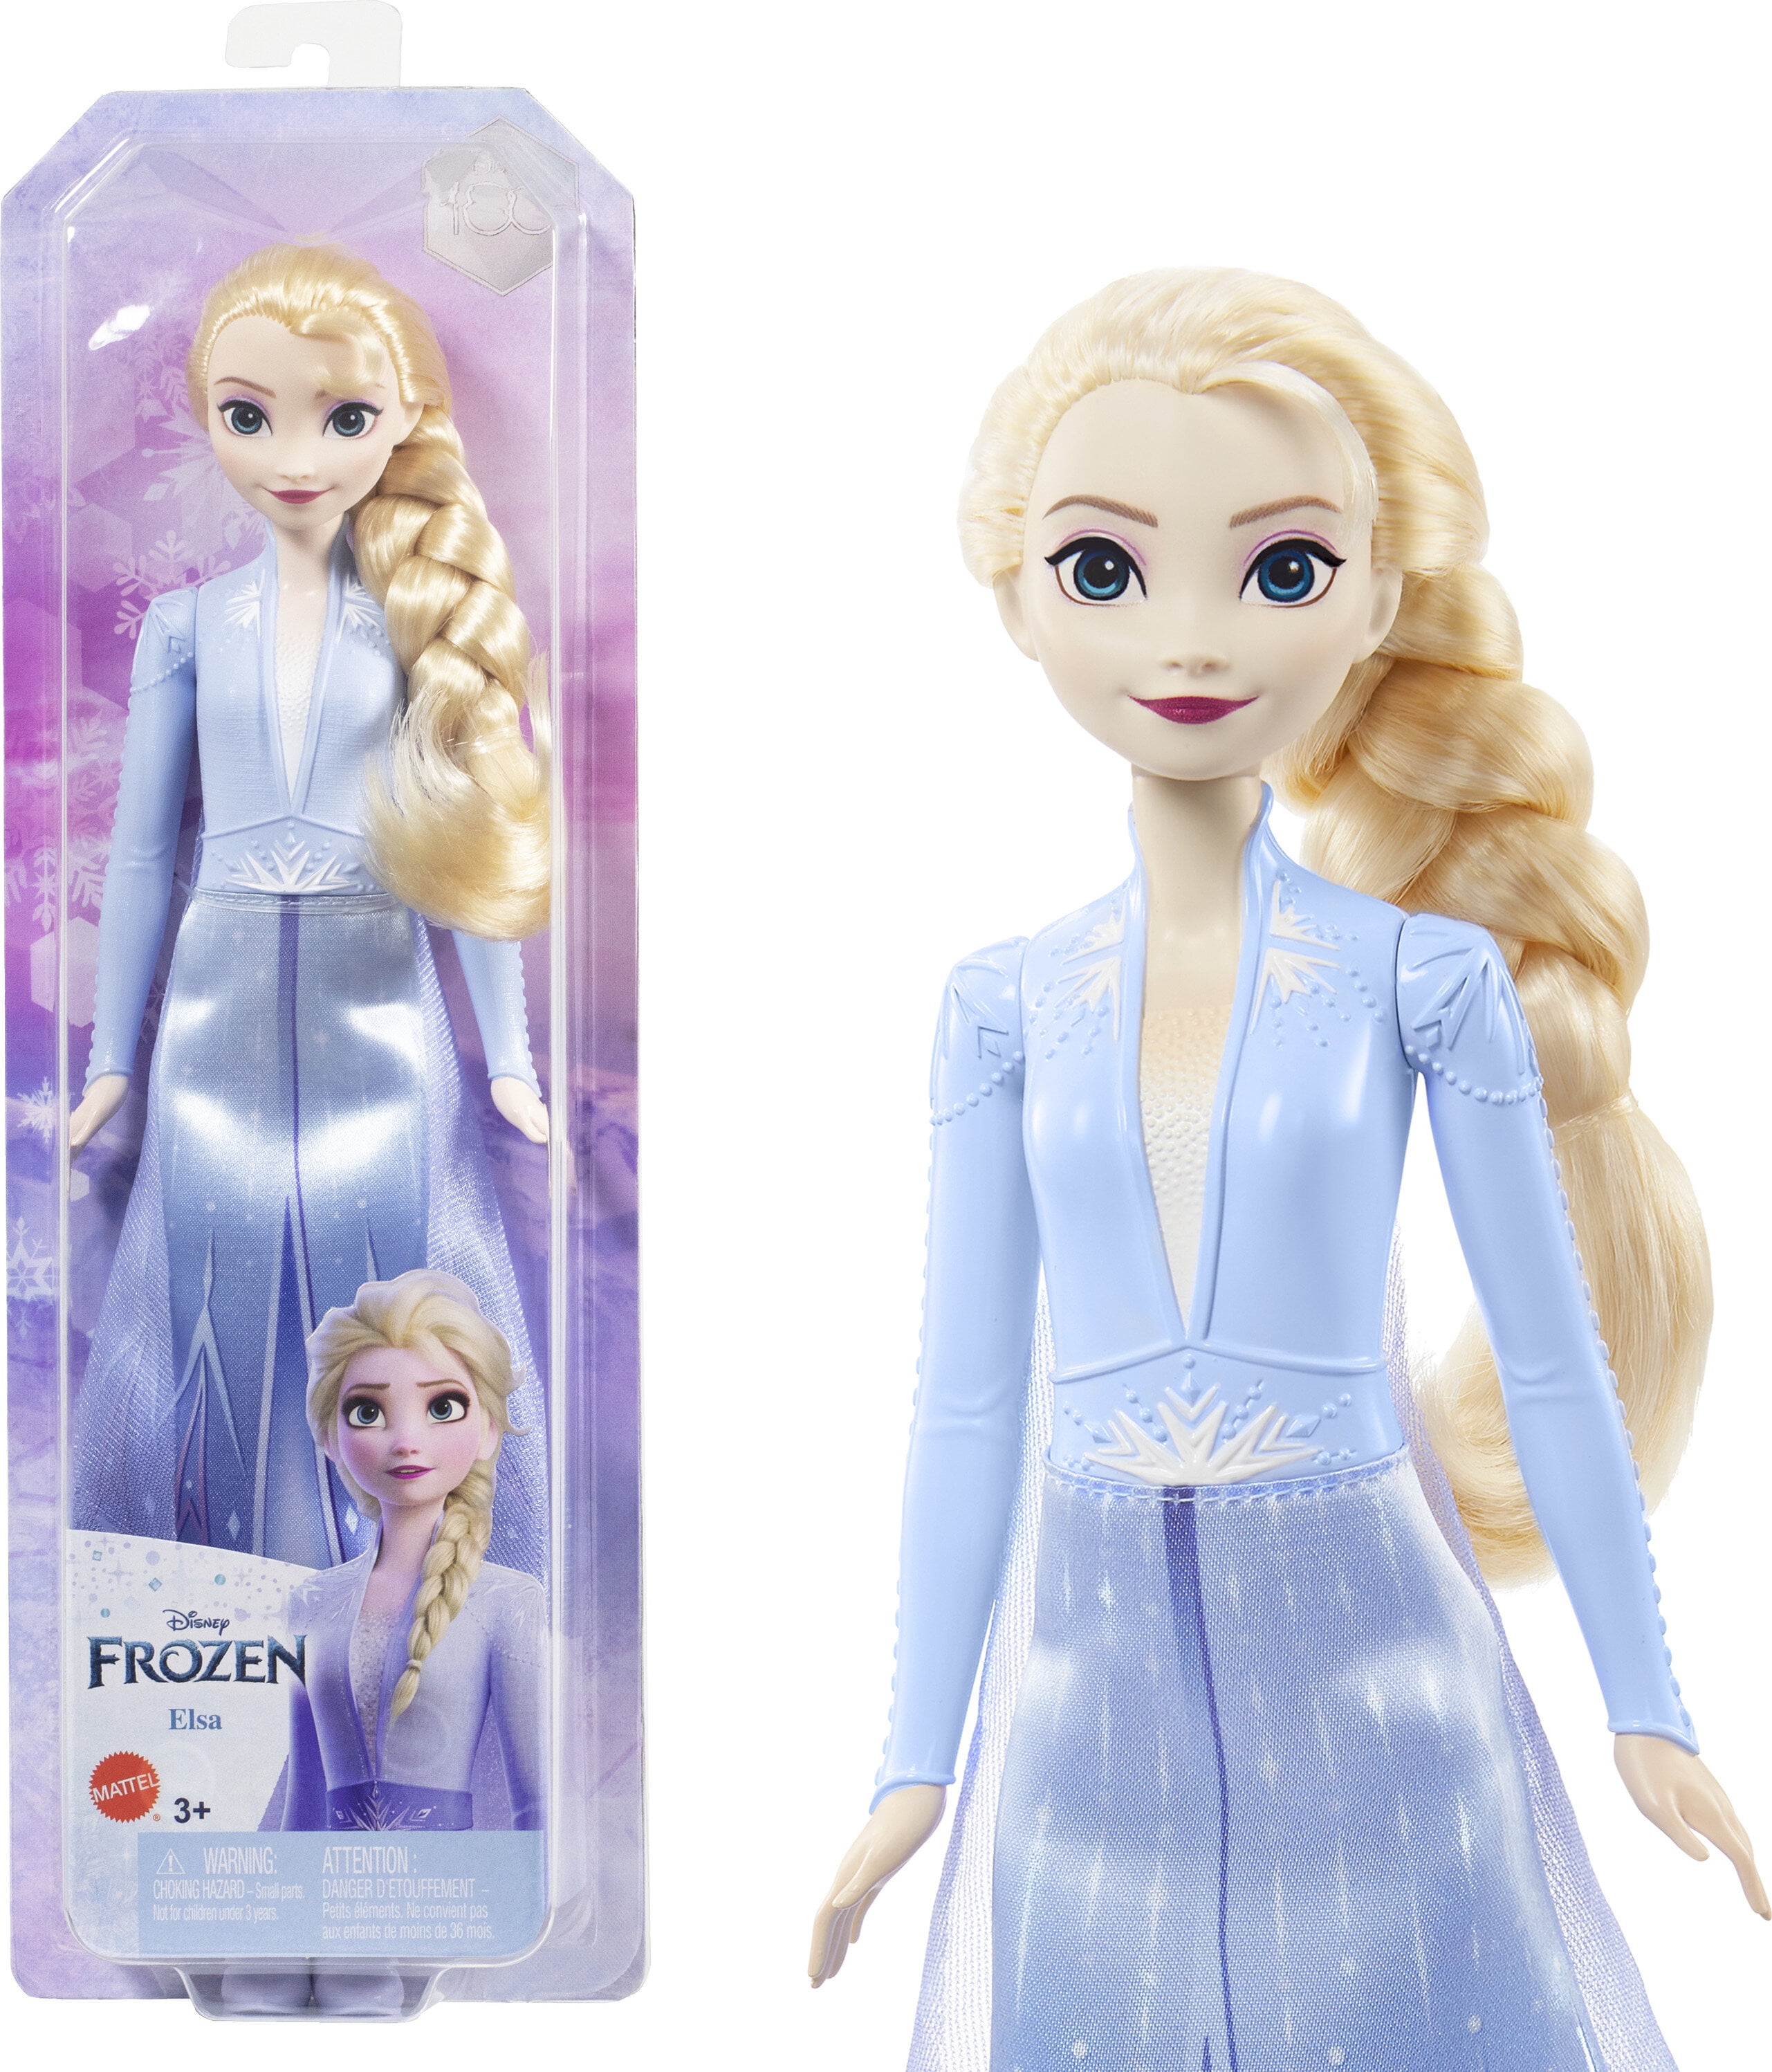 Disney Frozen Elsa Fashion Doll & Accessory, Toy Inspired by the